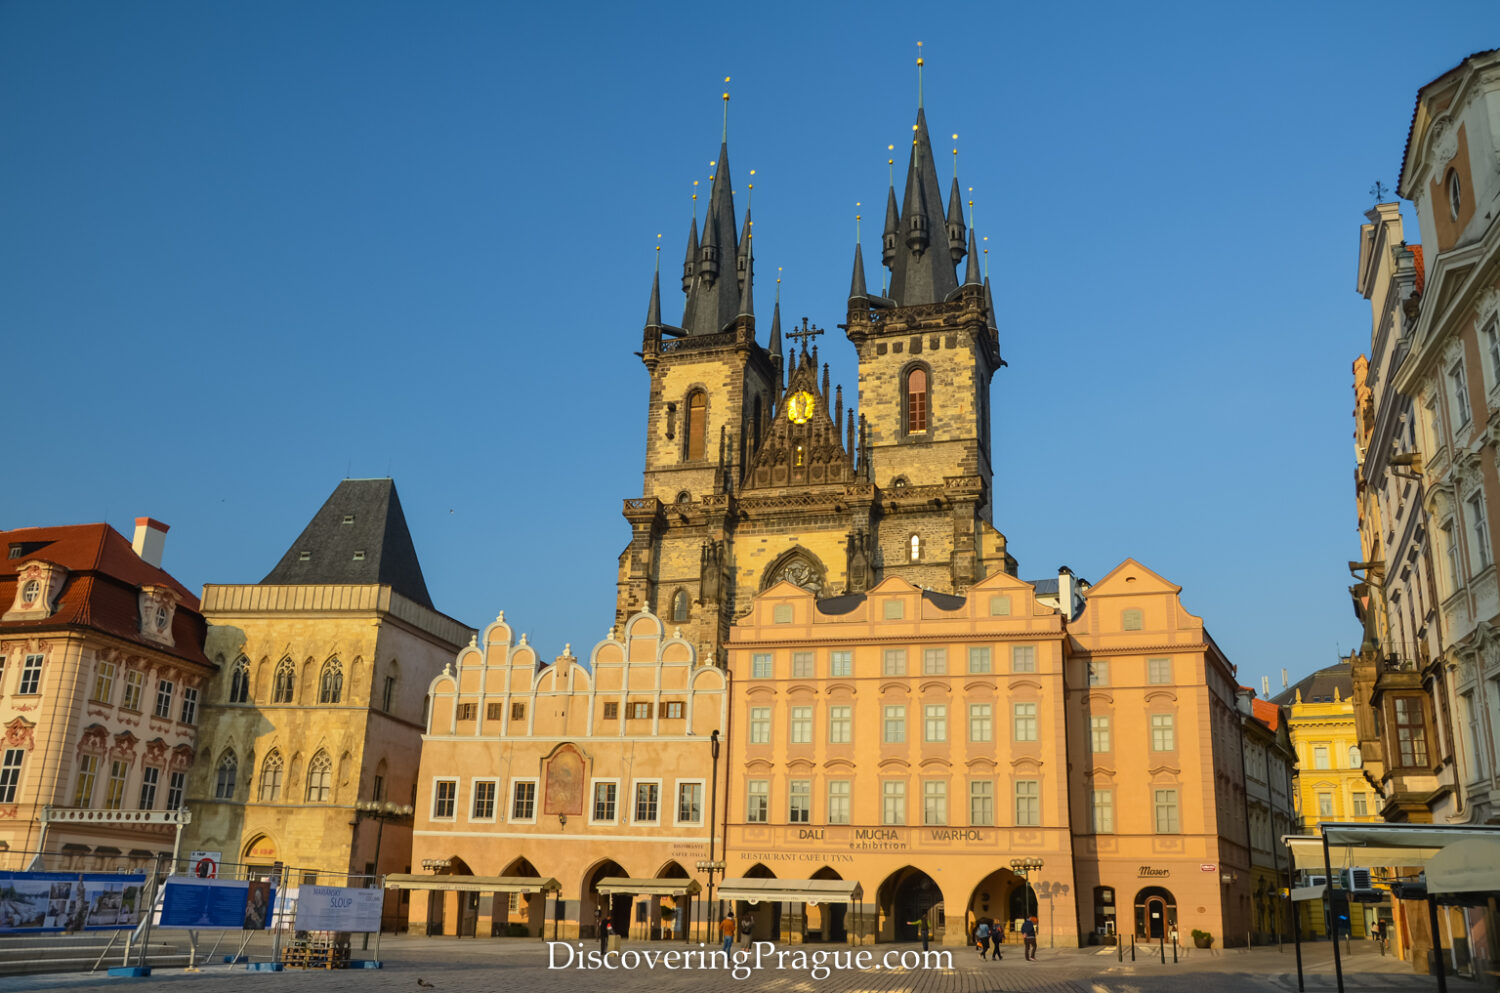 Old Town Square - Church of our Lady before Týn